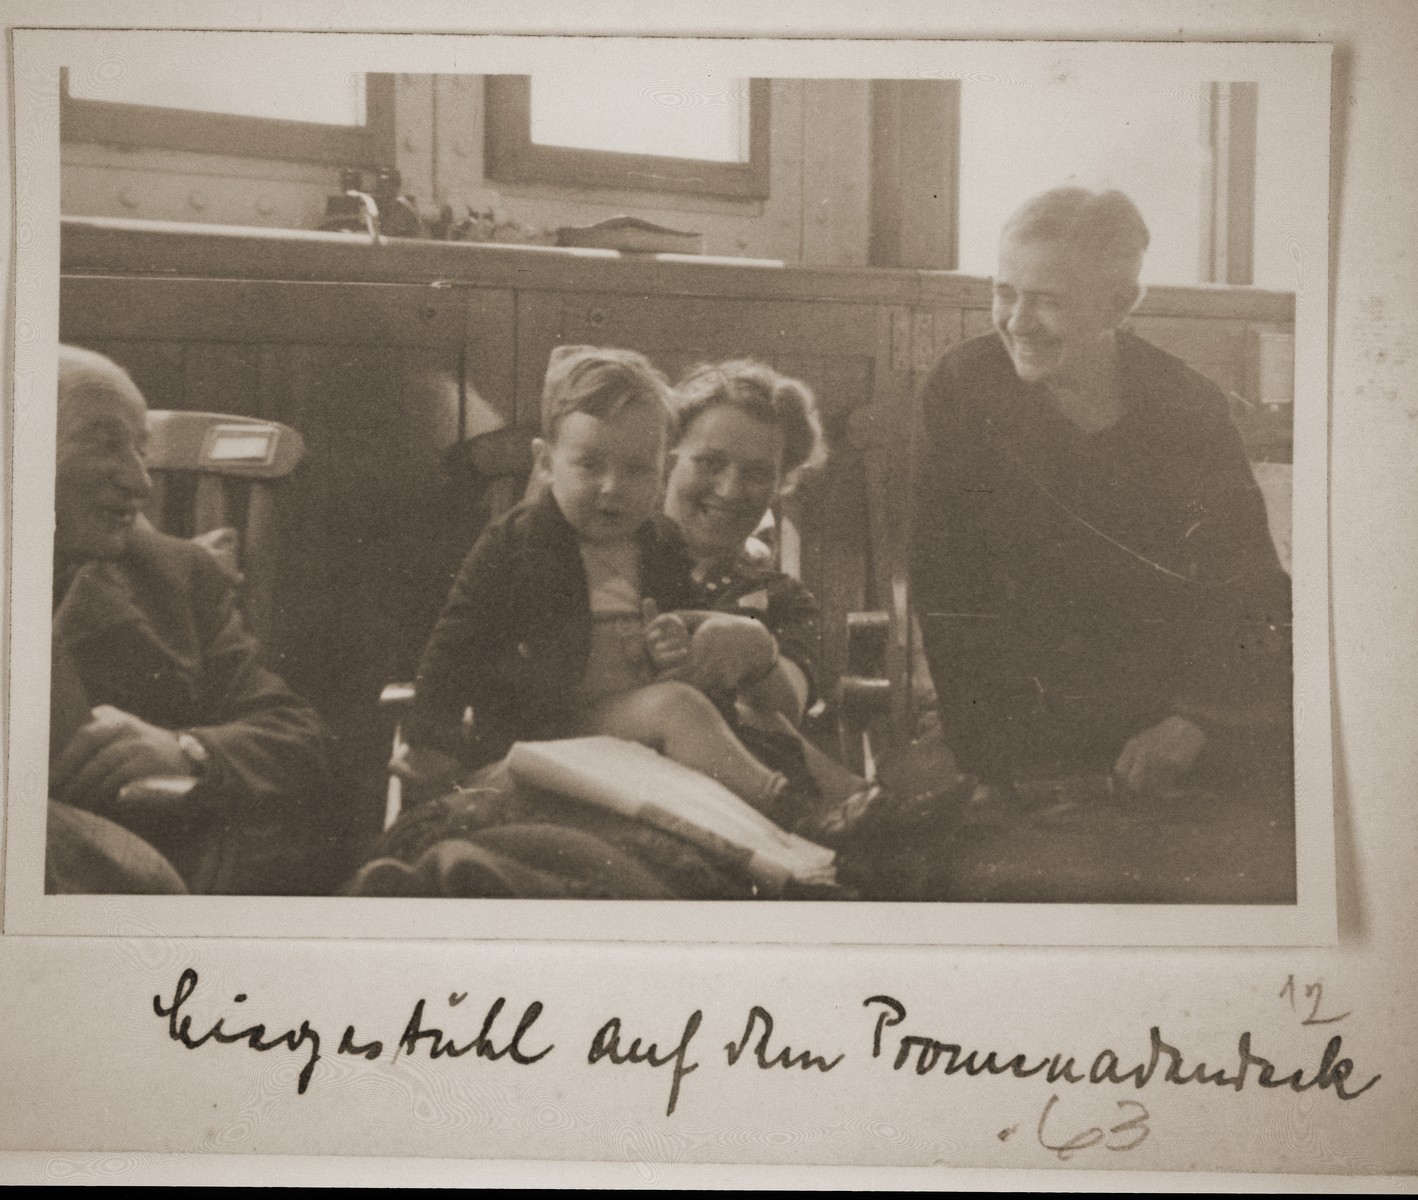 The Vendig family sits on the promenade deck of the St. Louis.